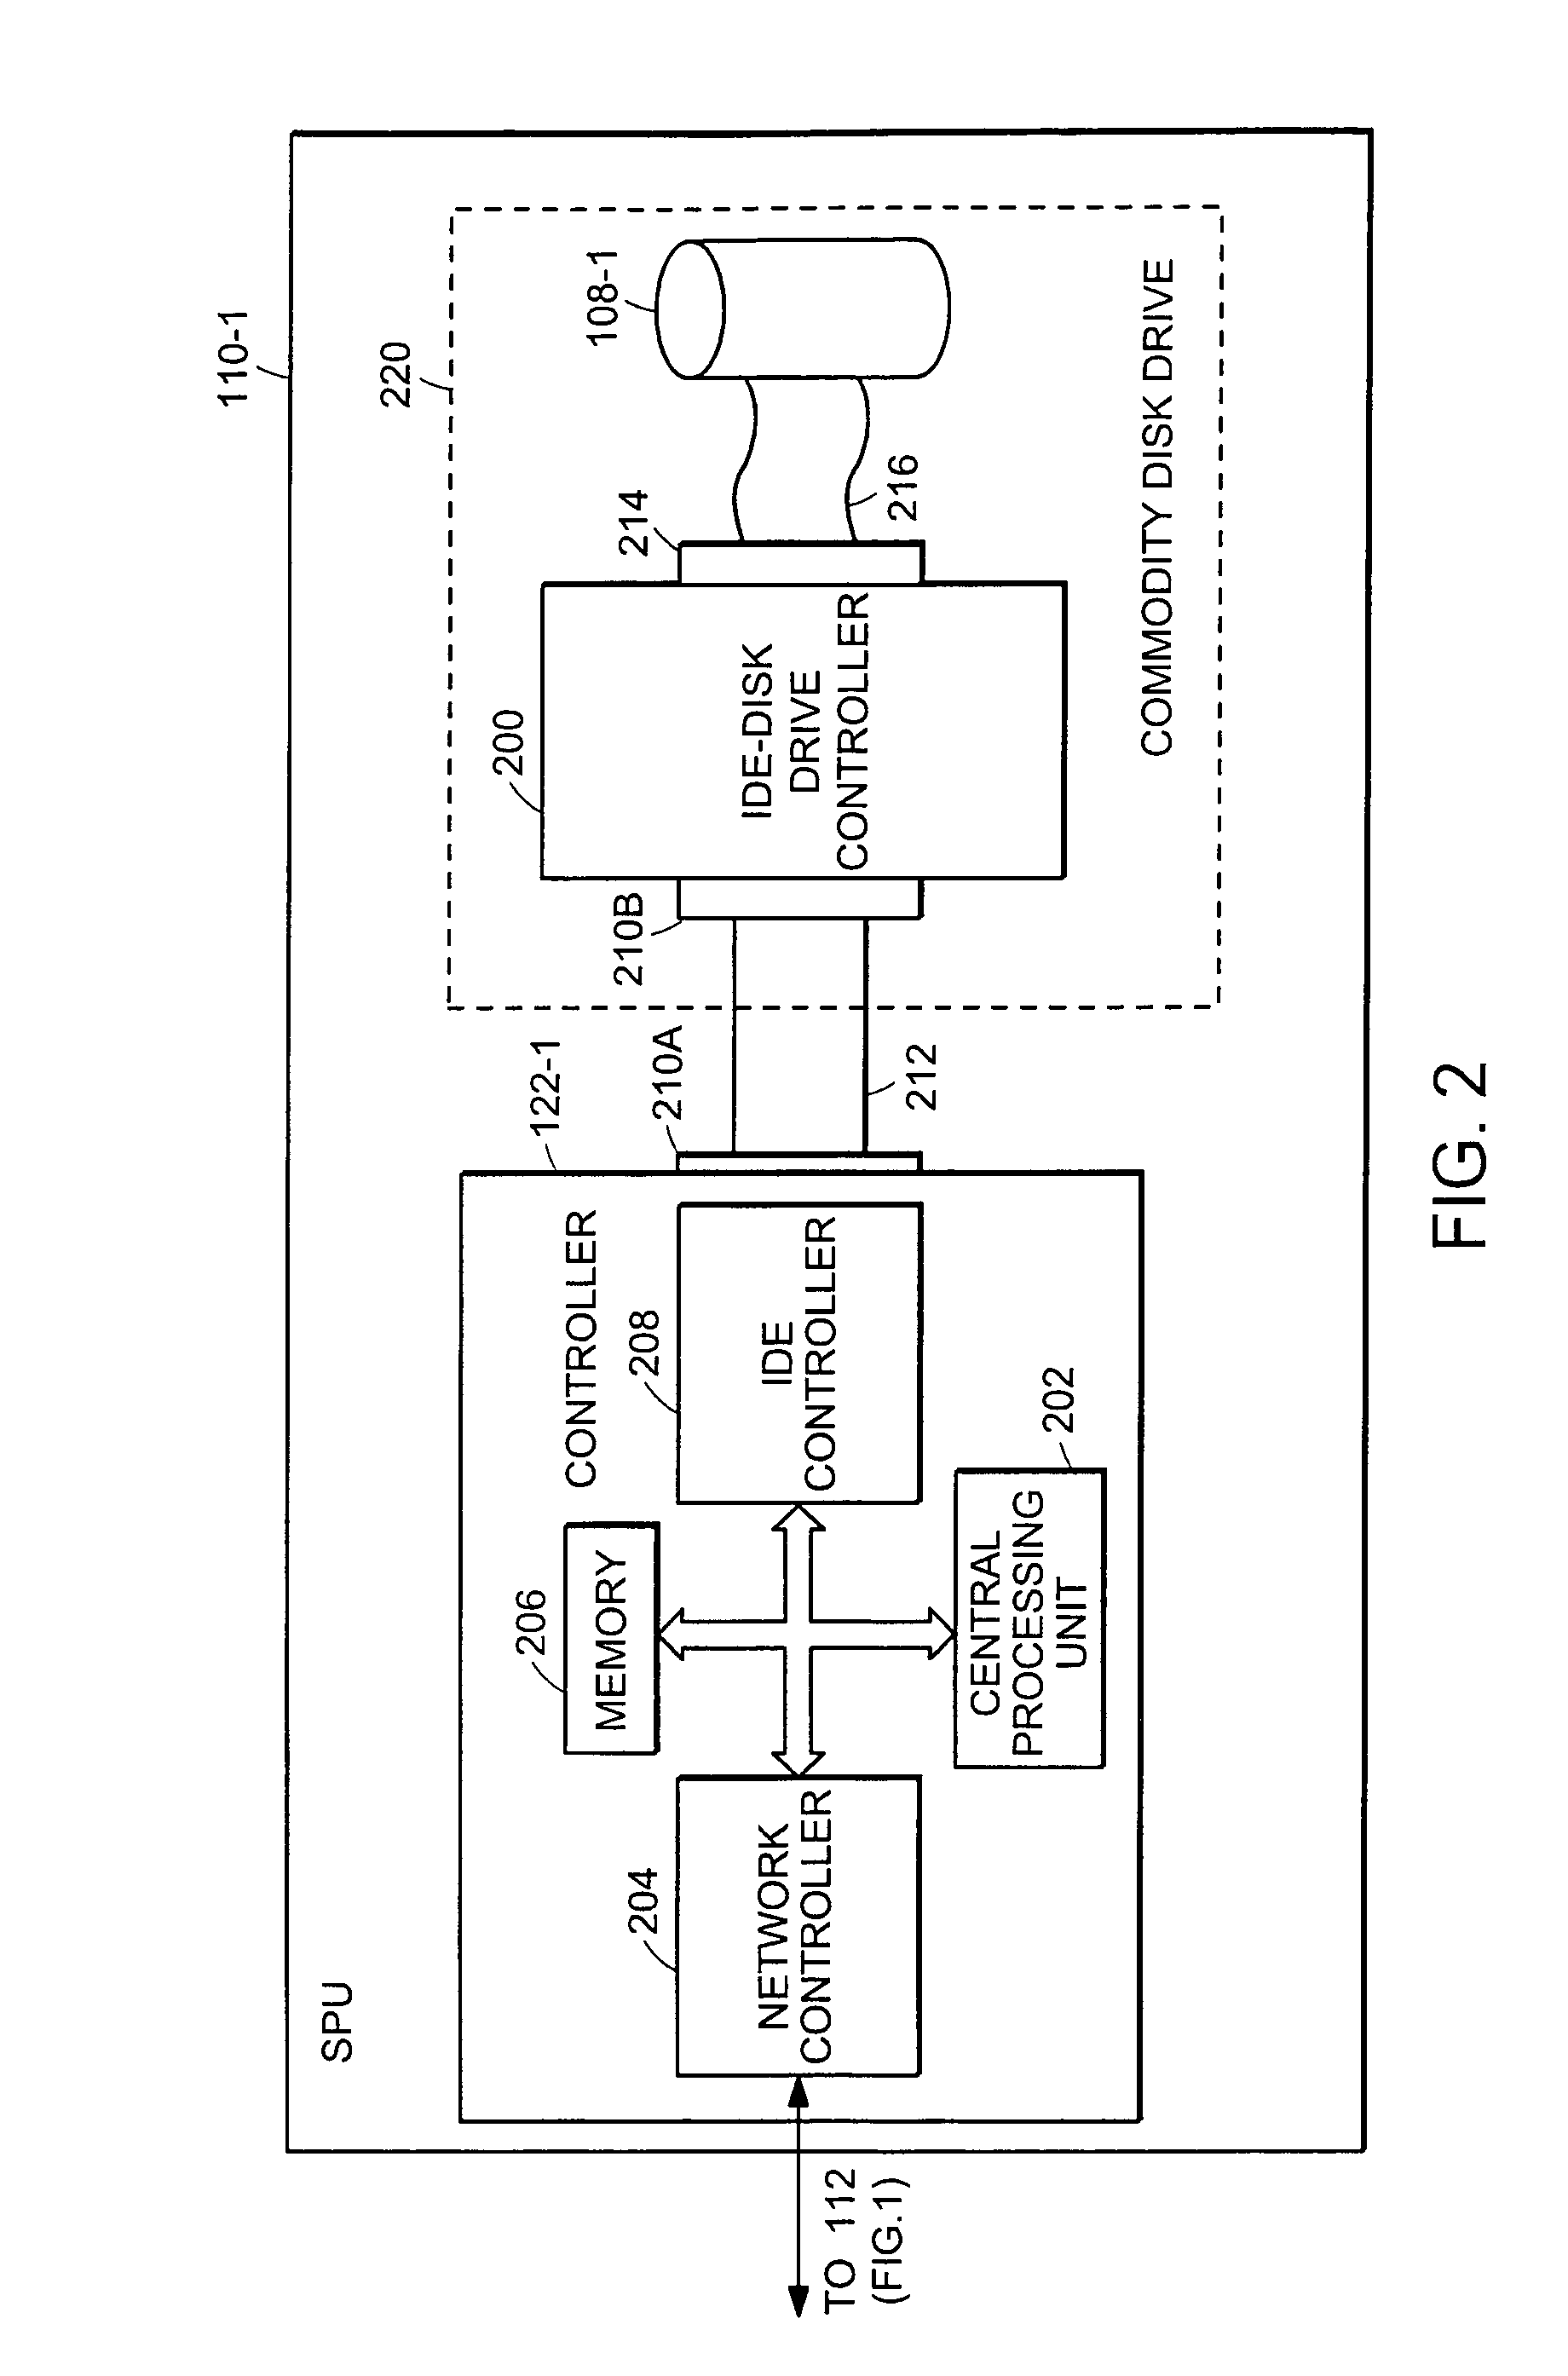 Disk mirror architecture for database appliance